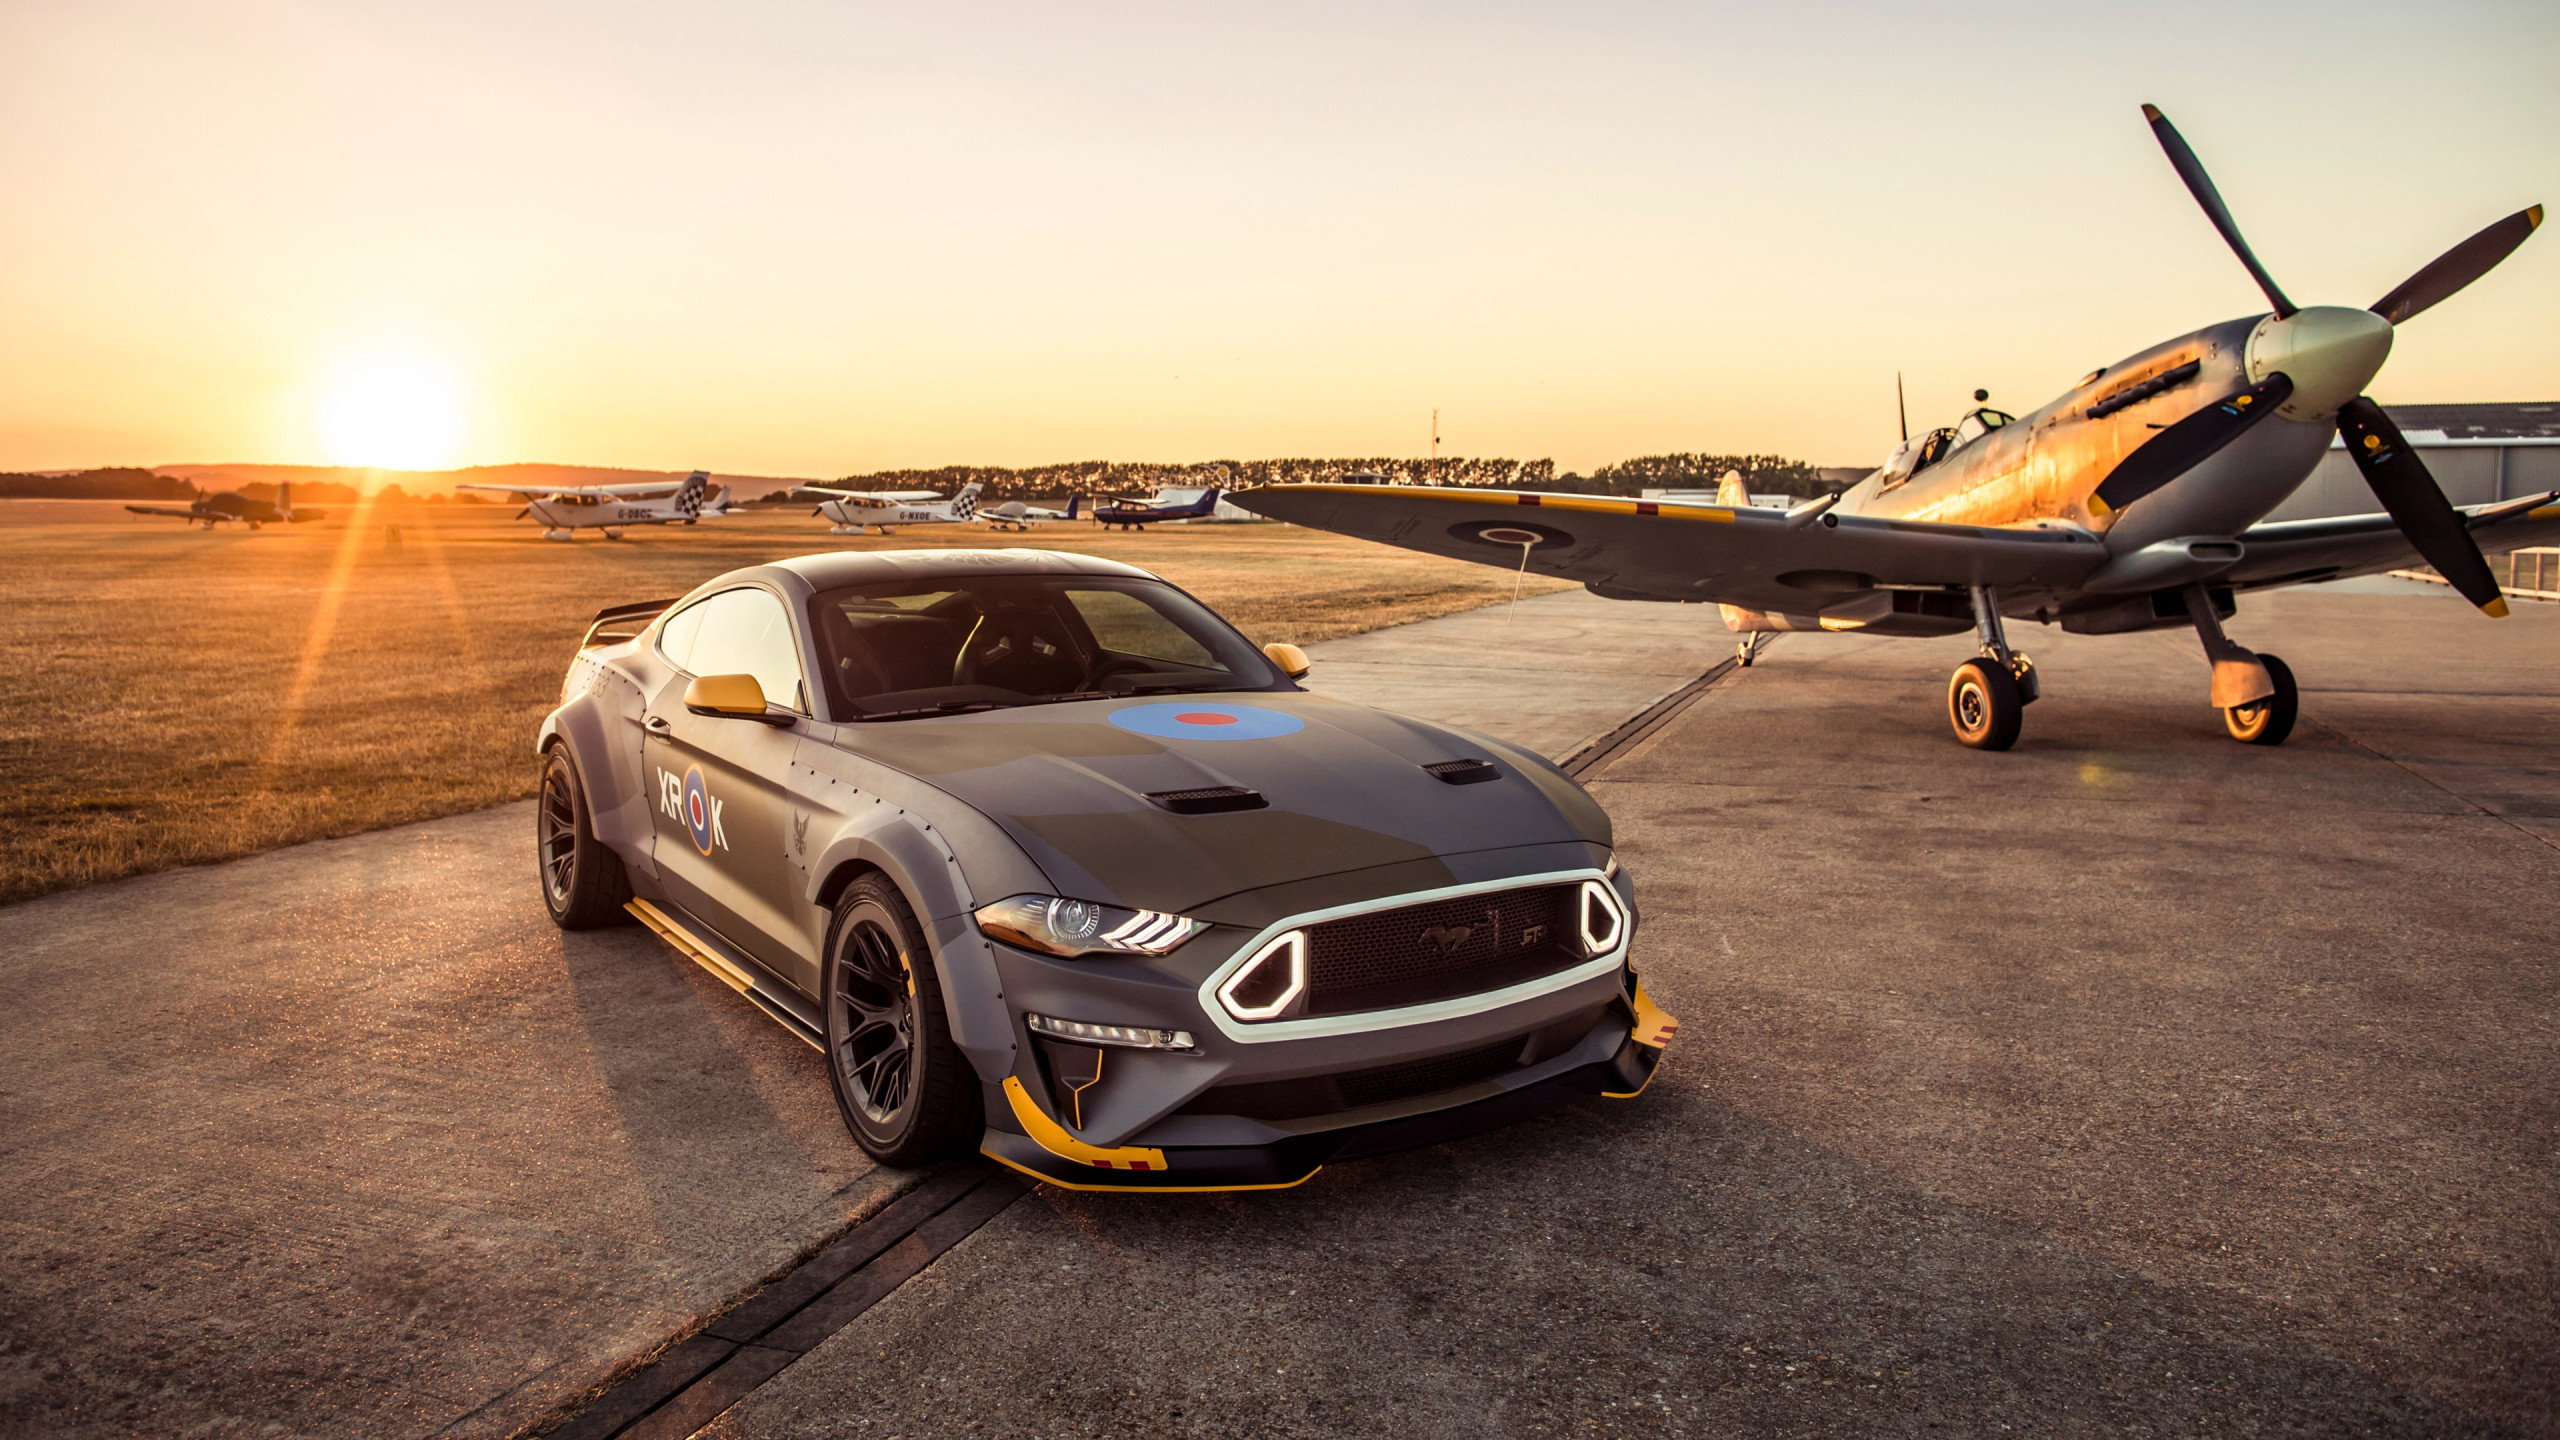 Ford Eagle Squadron Mustang GT wallpaper 2560x1440